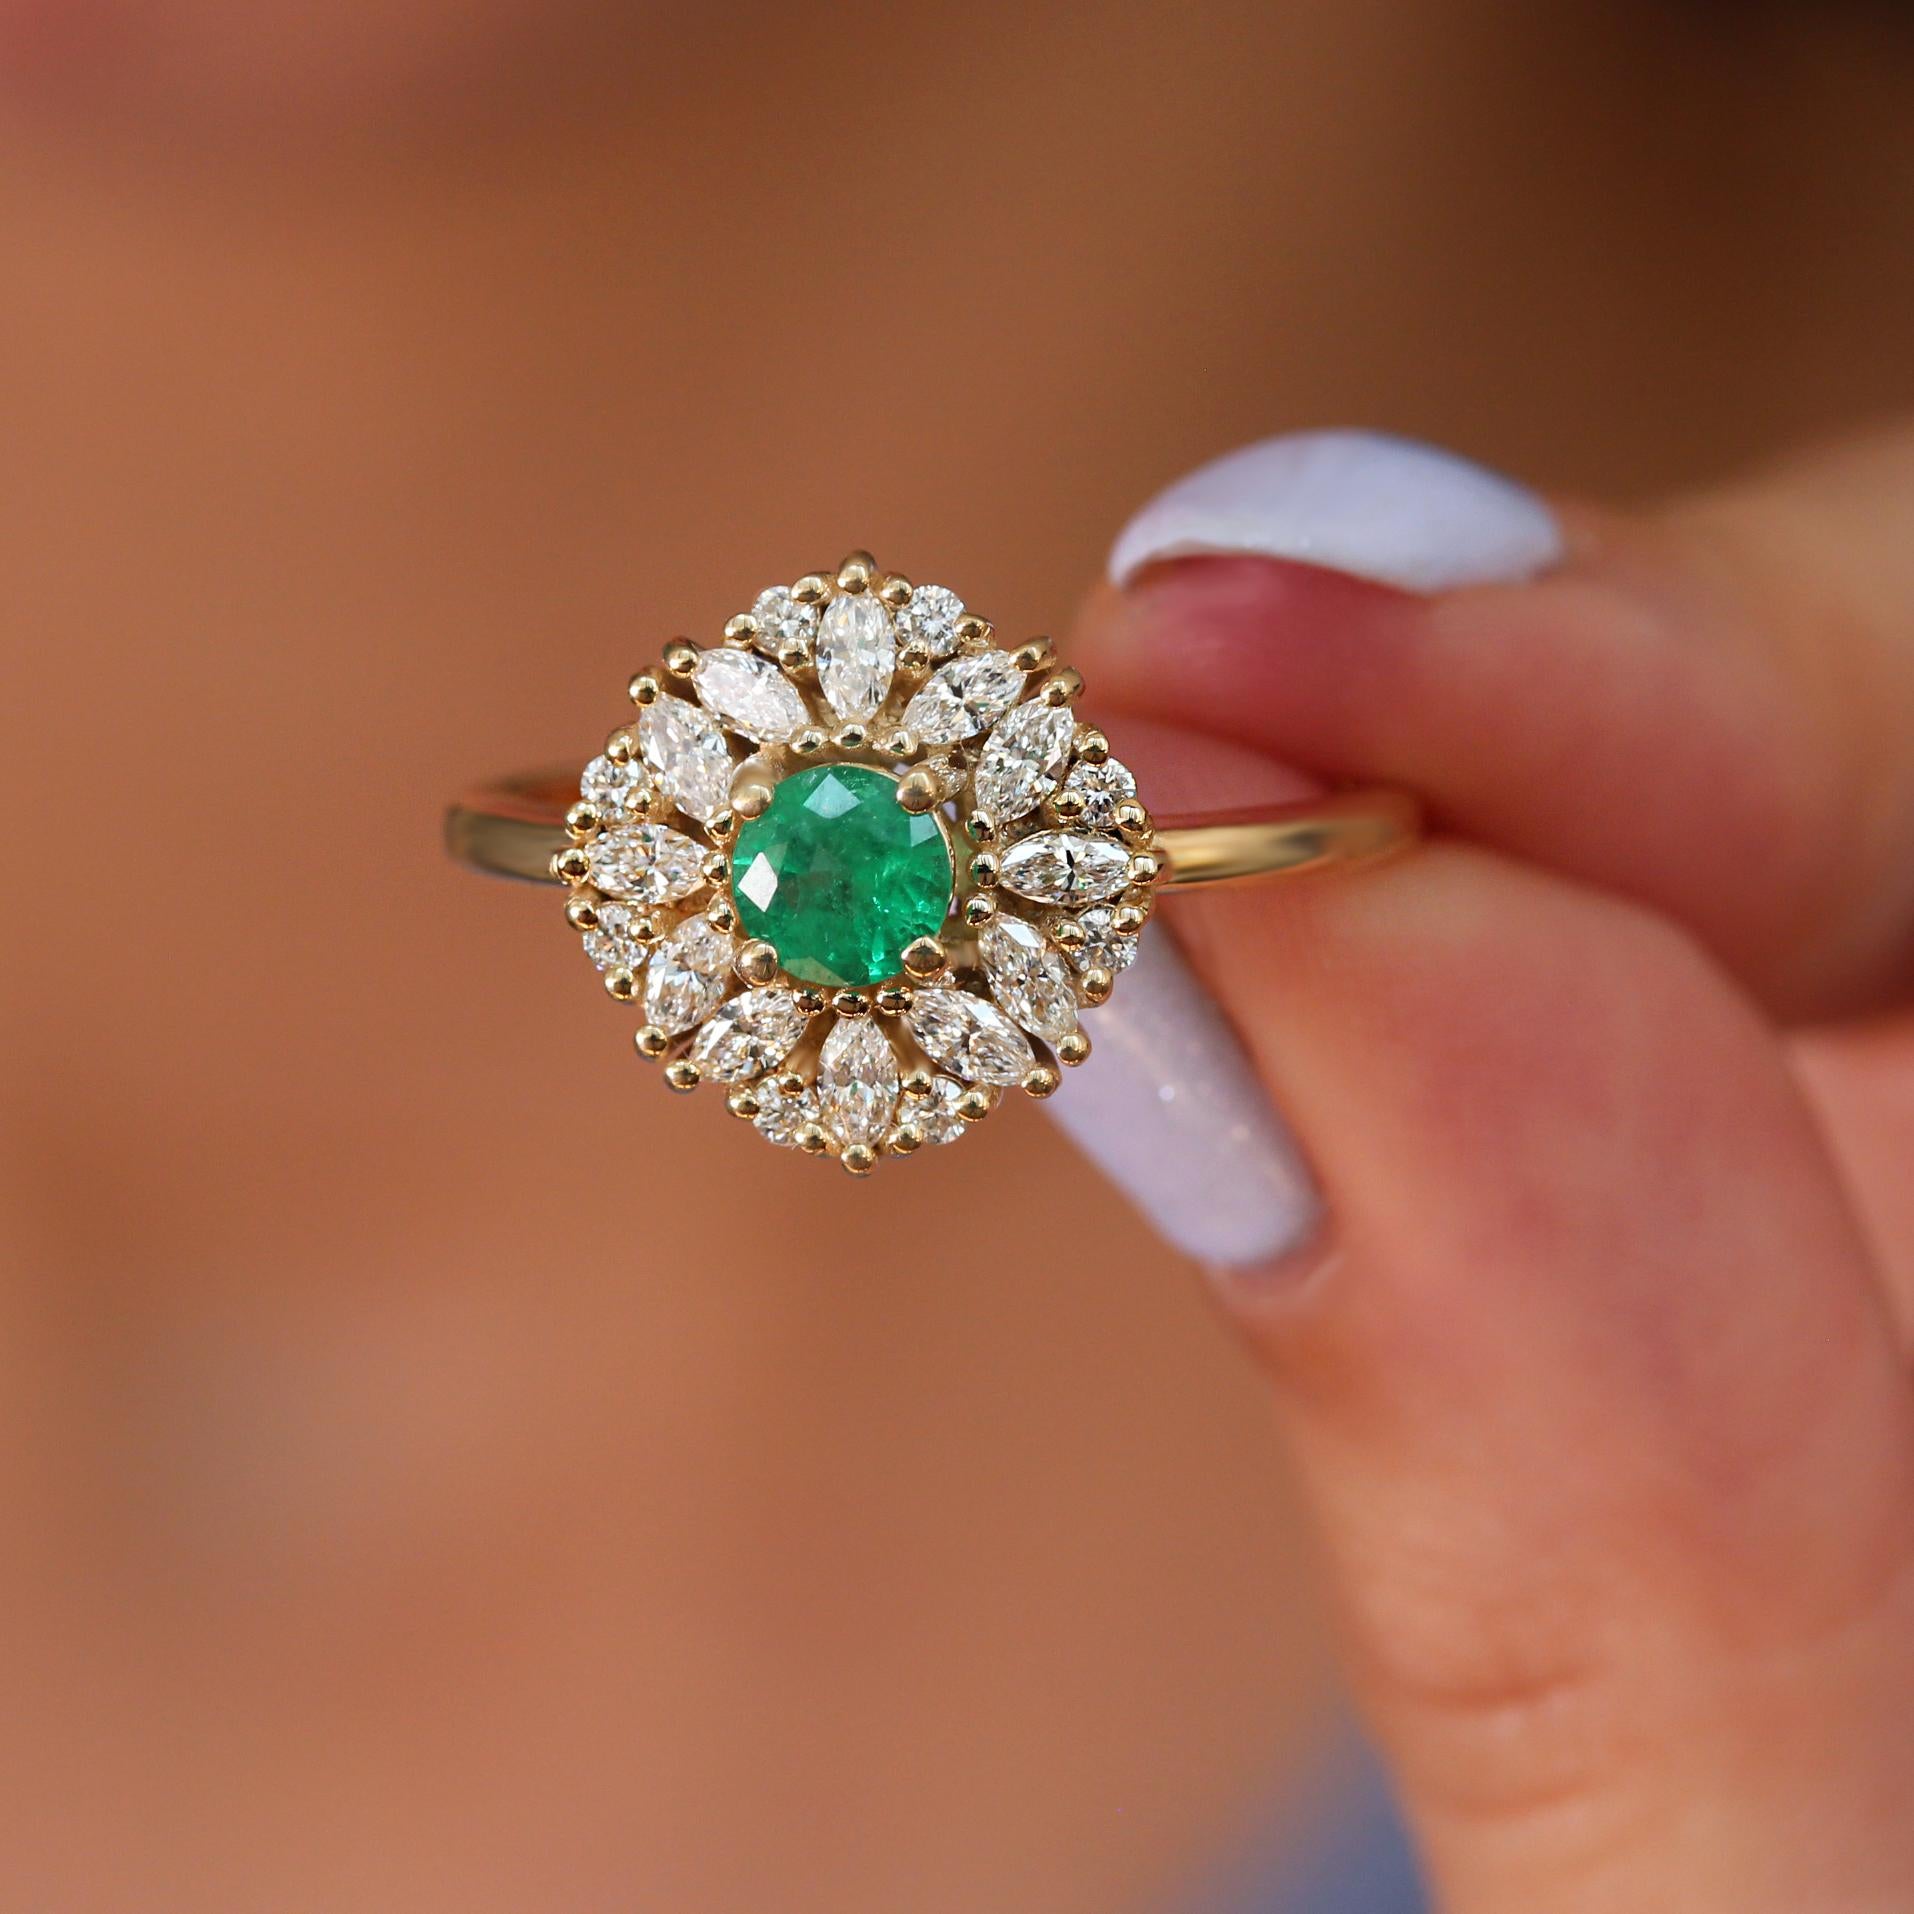 Ballerina Round Cut Emerald Unique Art Deco Engagement Ring, Harper In New Condition For Sale In Hertsliya, IL